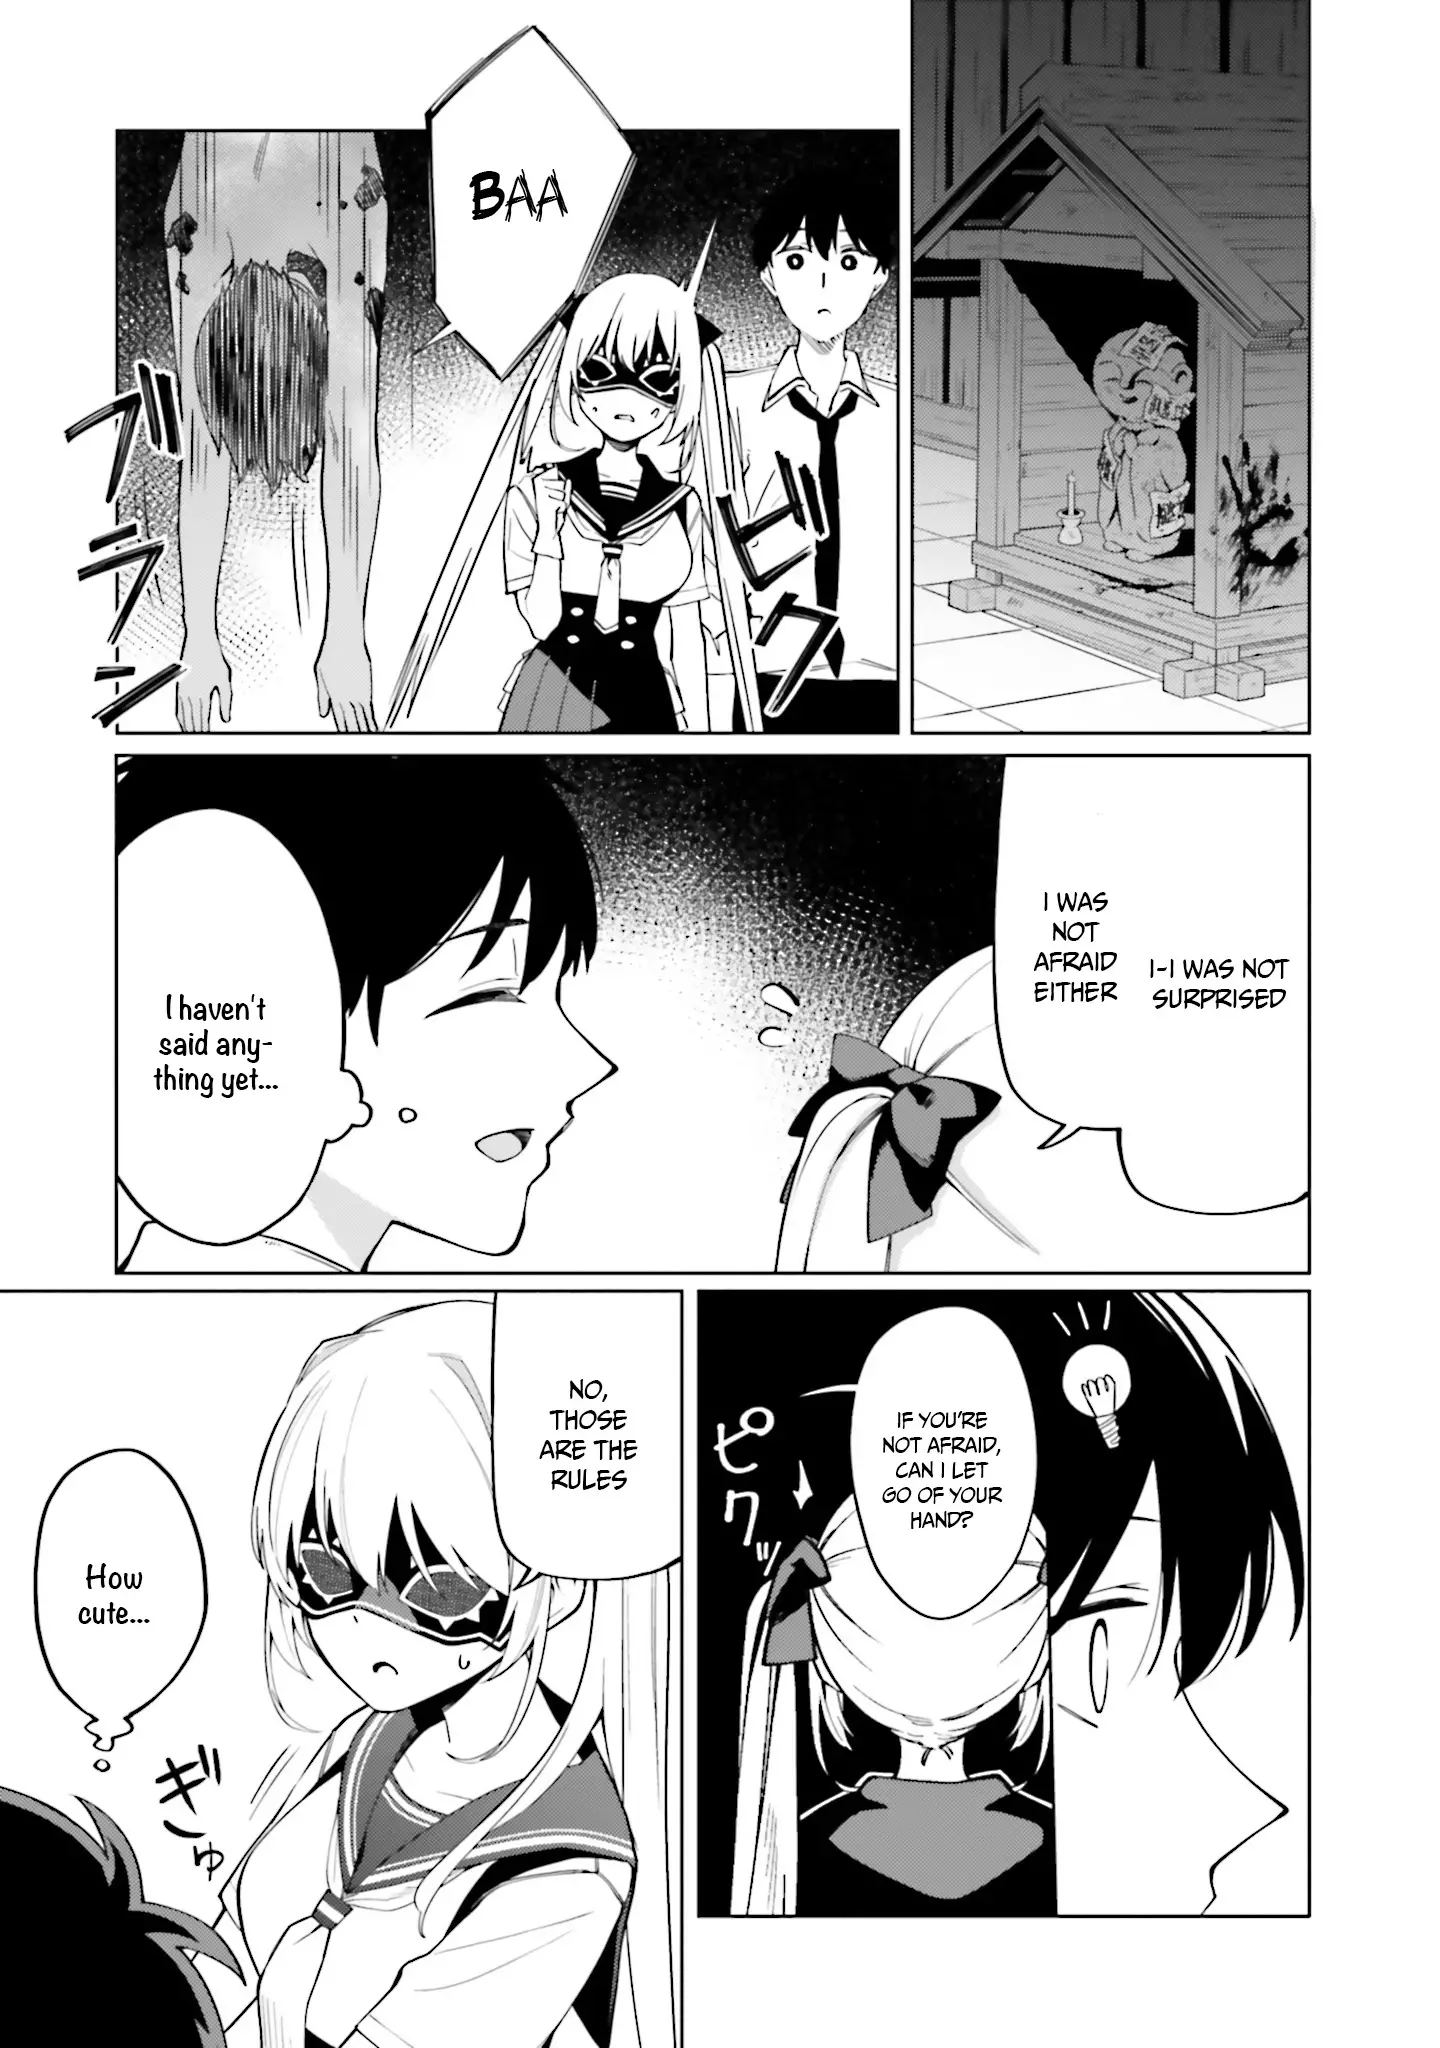 I Don't Understand Shirogane-San's Facial Expression At All - 12 page 10-02a85f2b